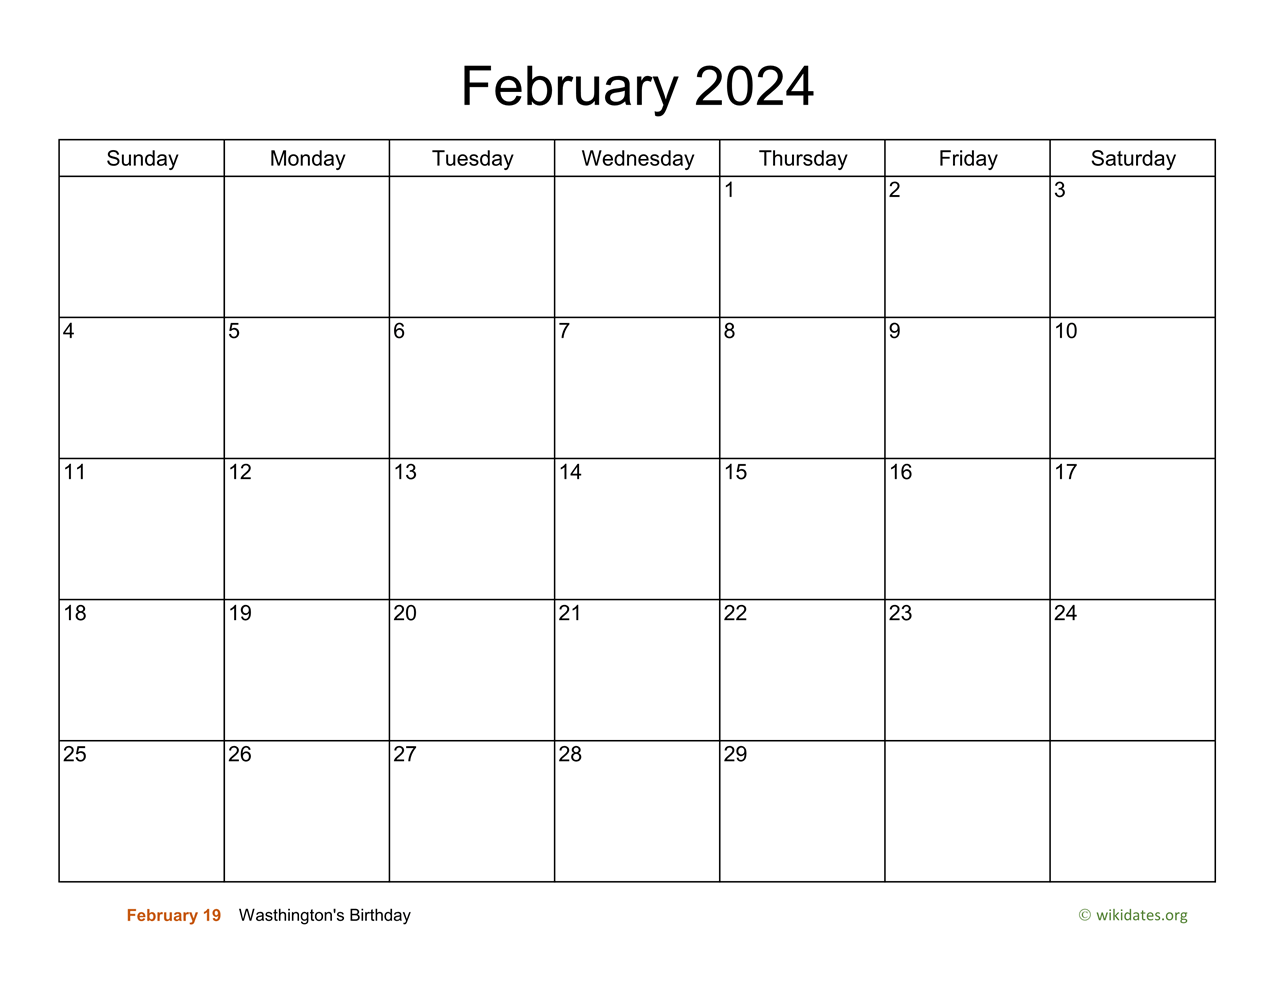 February 2024 Blank Calendar Your Guide to Planning and Organization